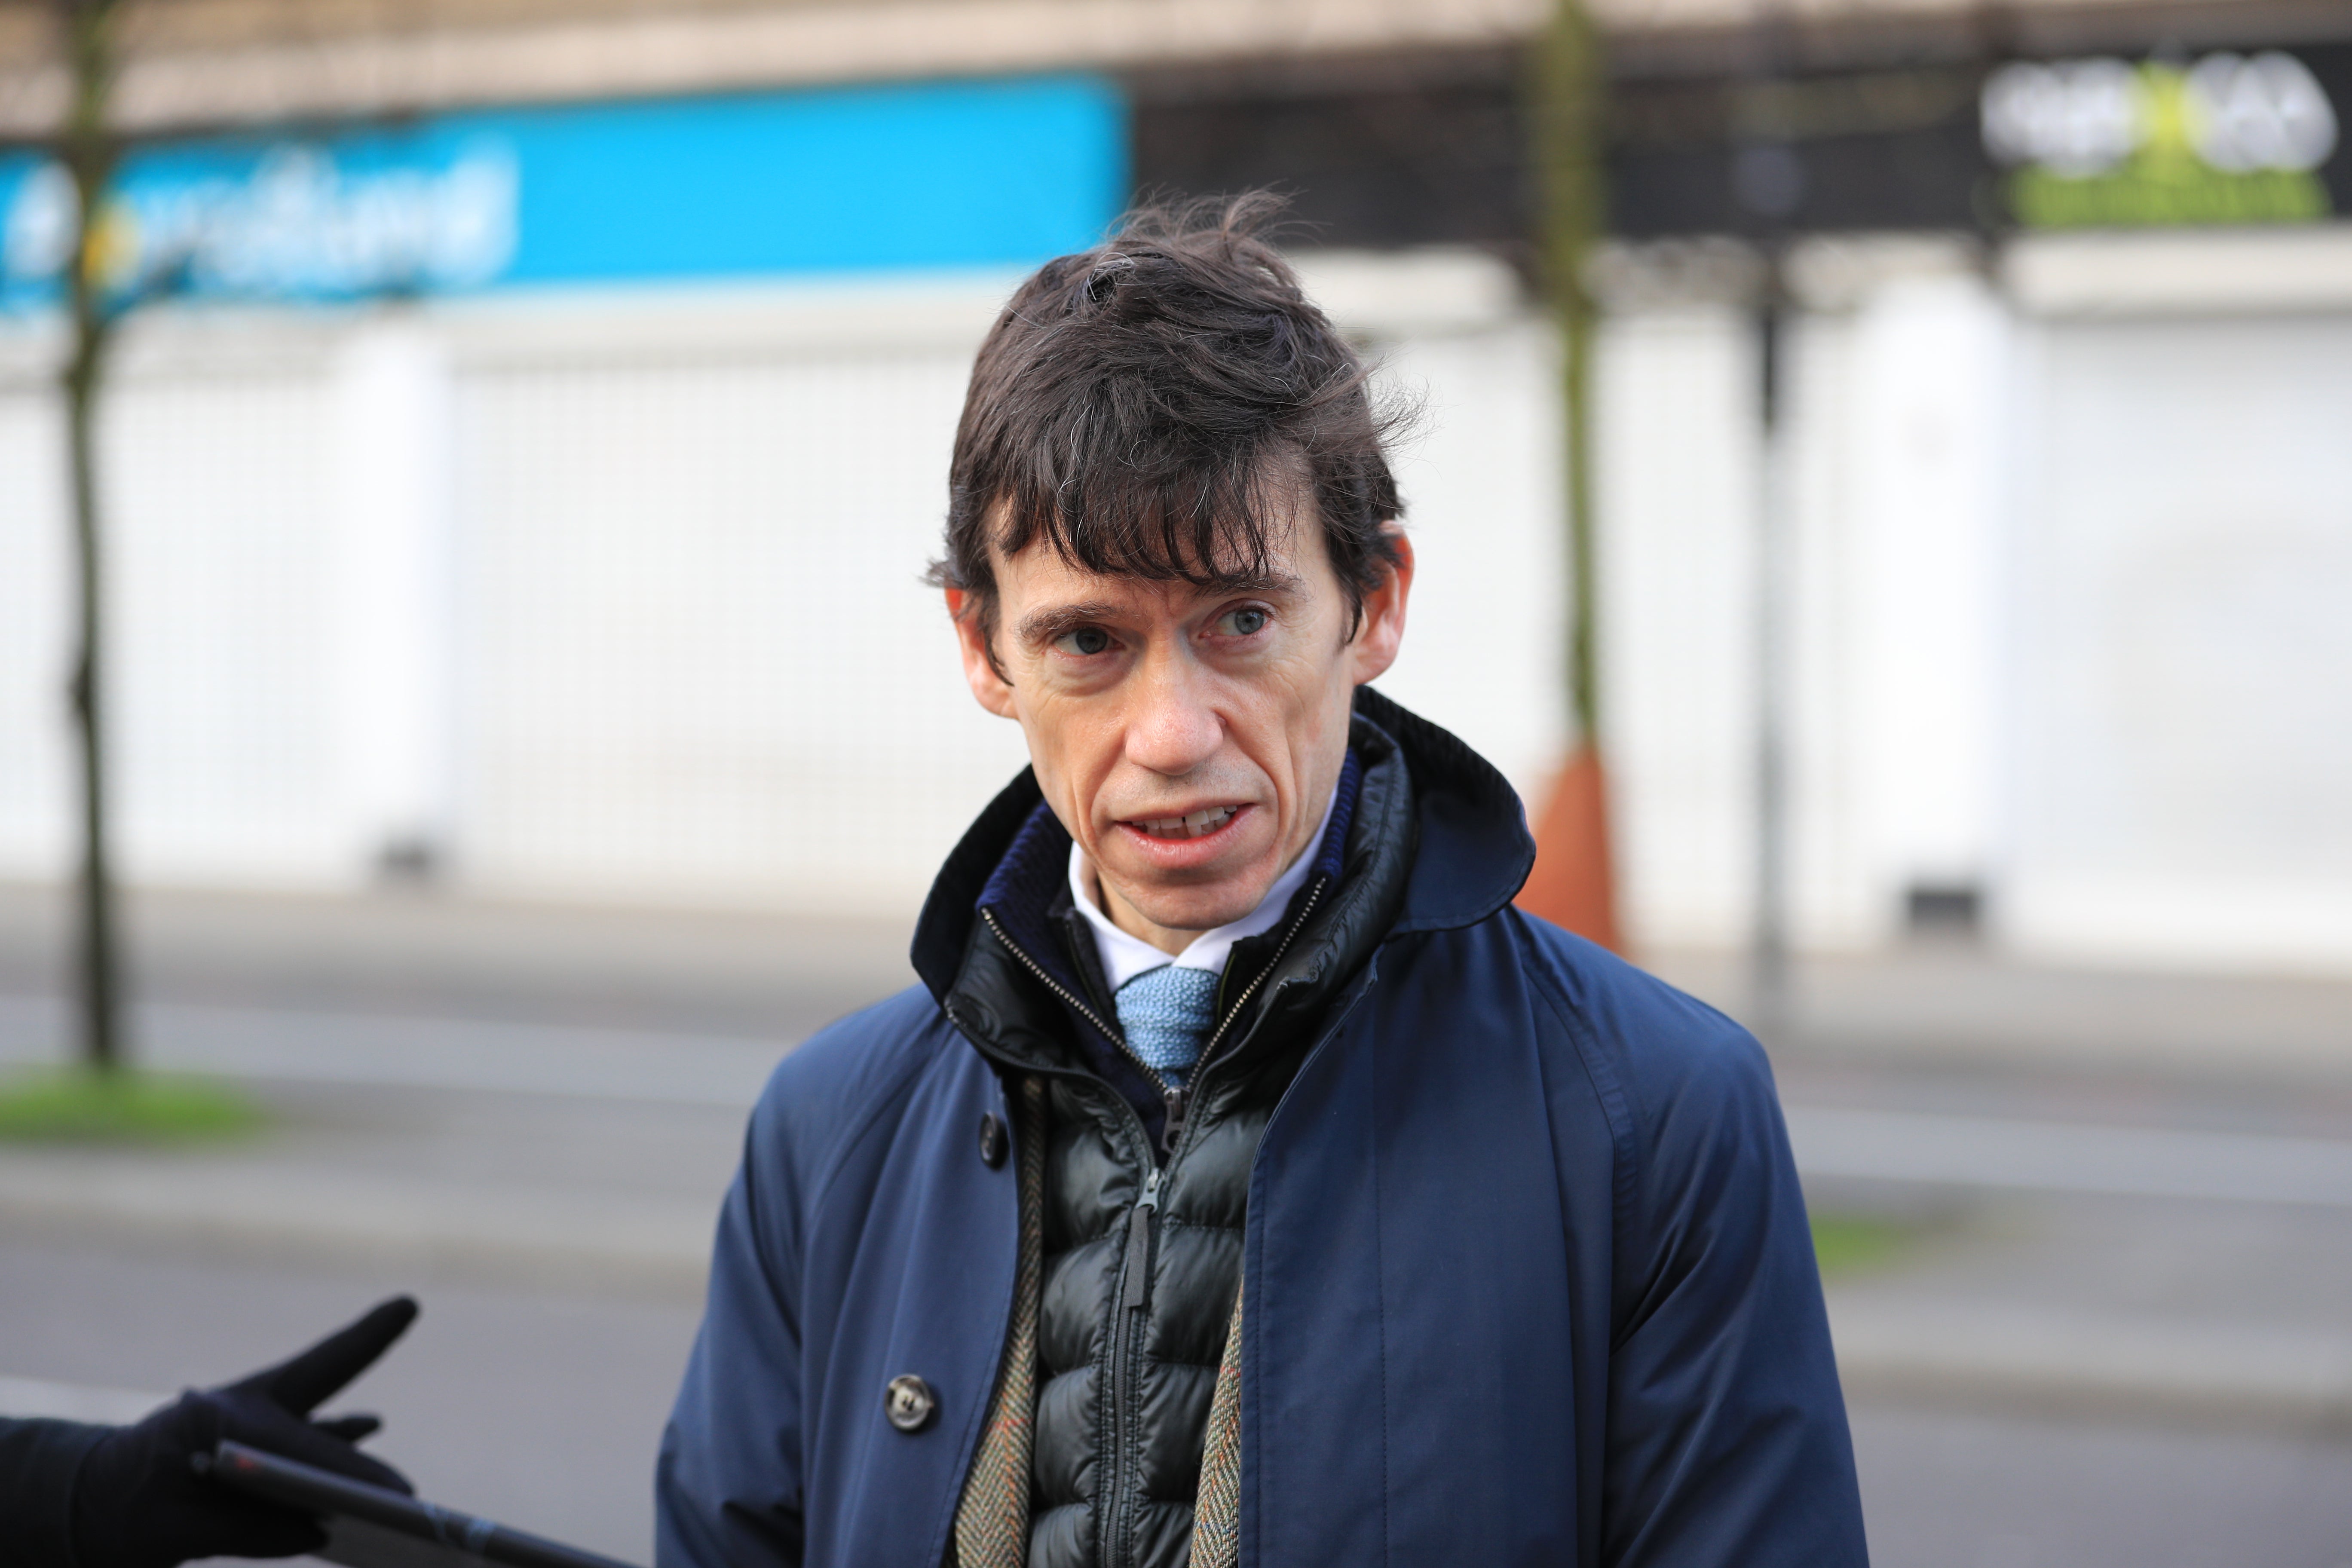 Rory Stewart said the pilot’s story was ‘profoundly shocking’